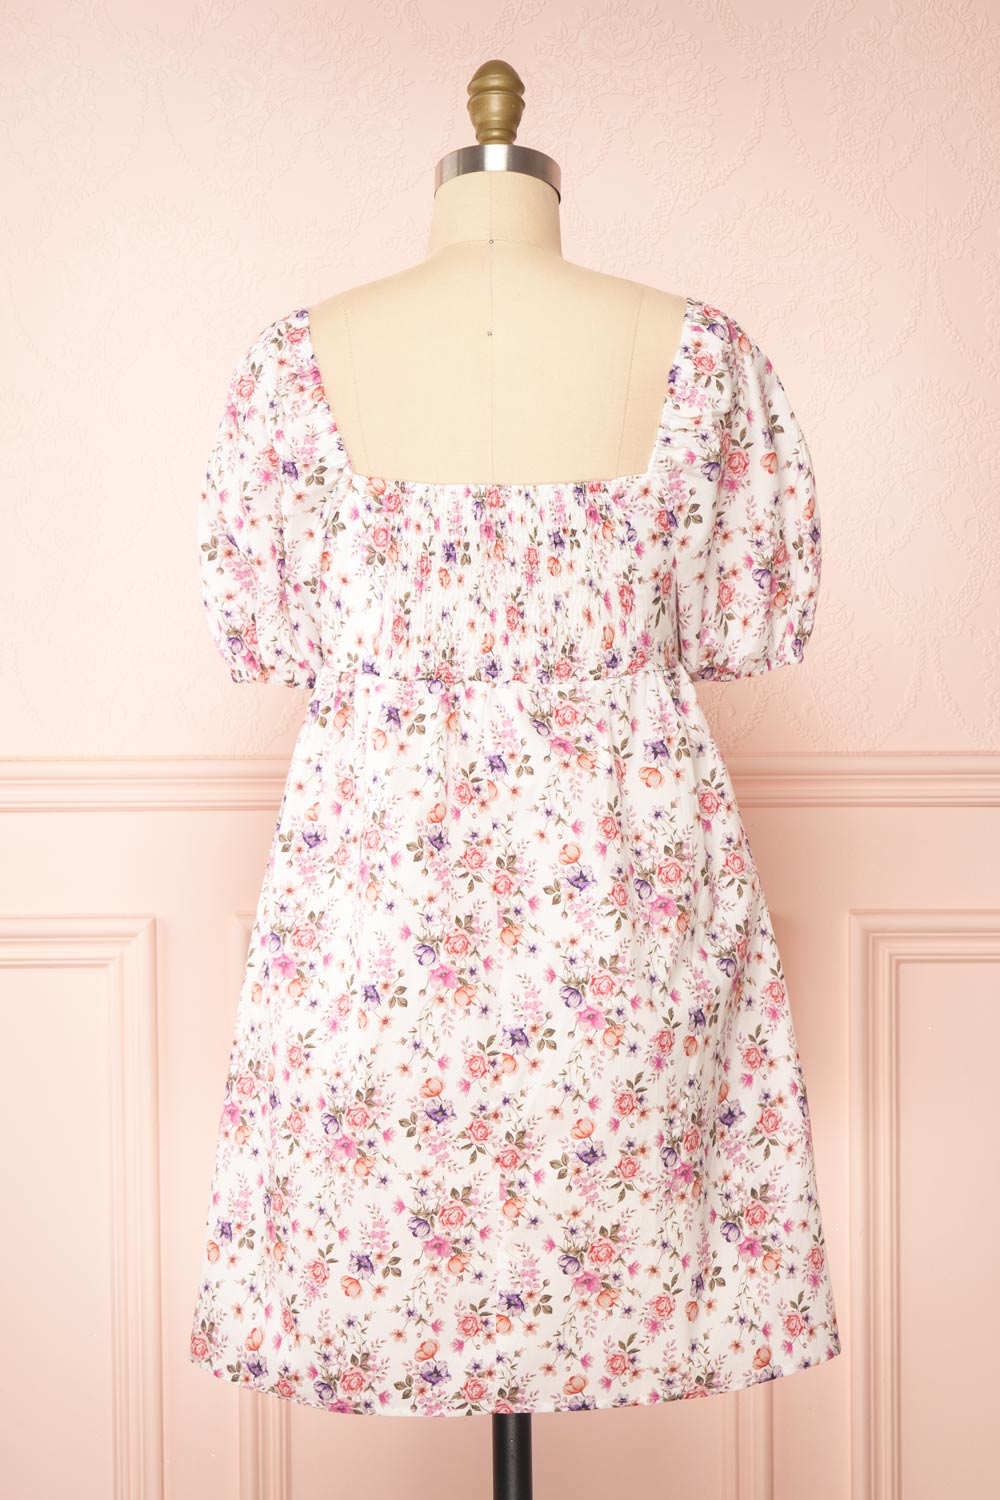 By Anthropologie Floral Square Neck Corset Mini Dress Sleeveless